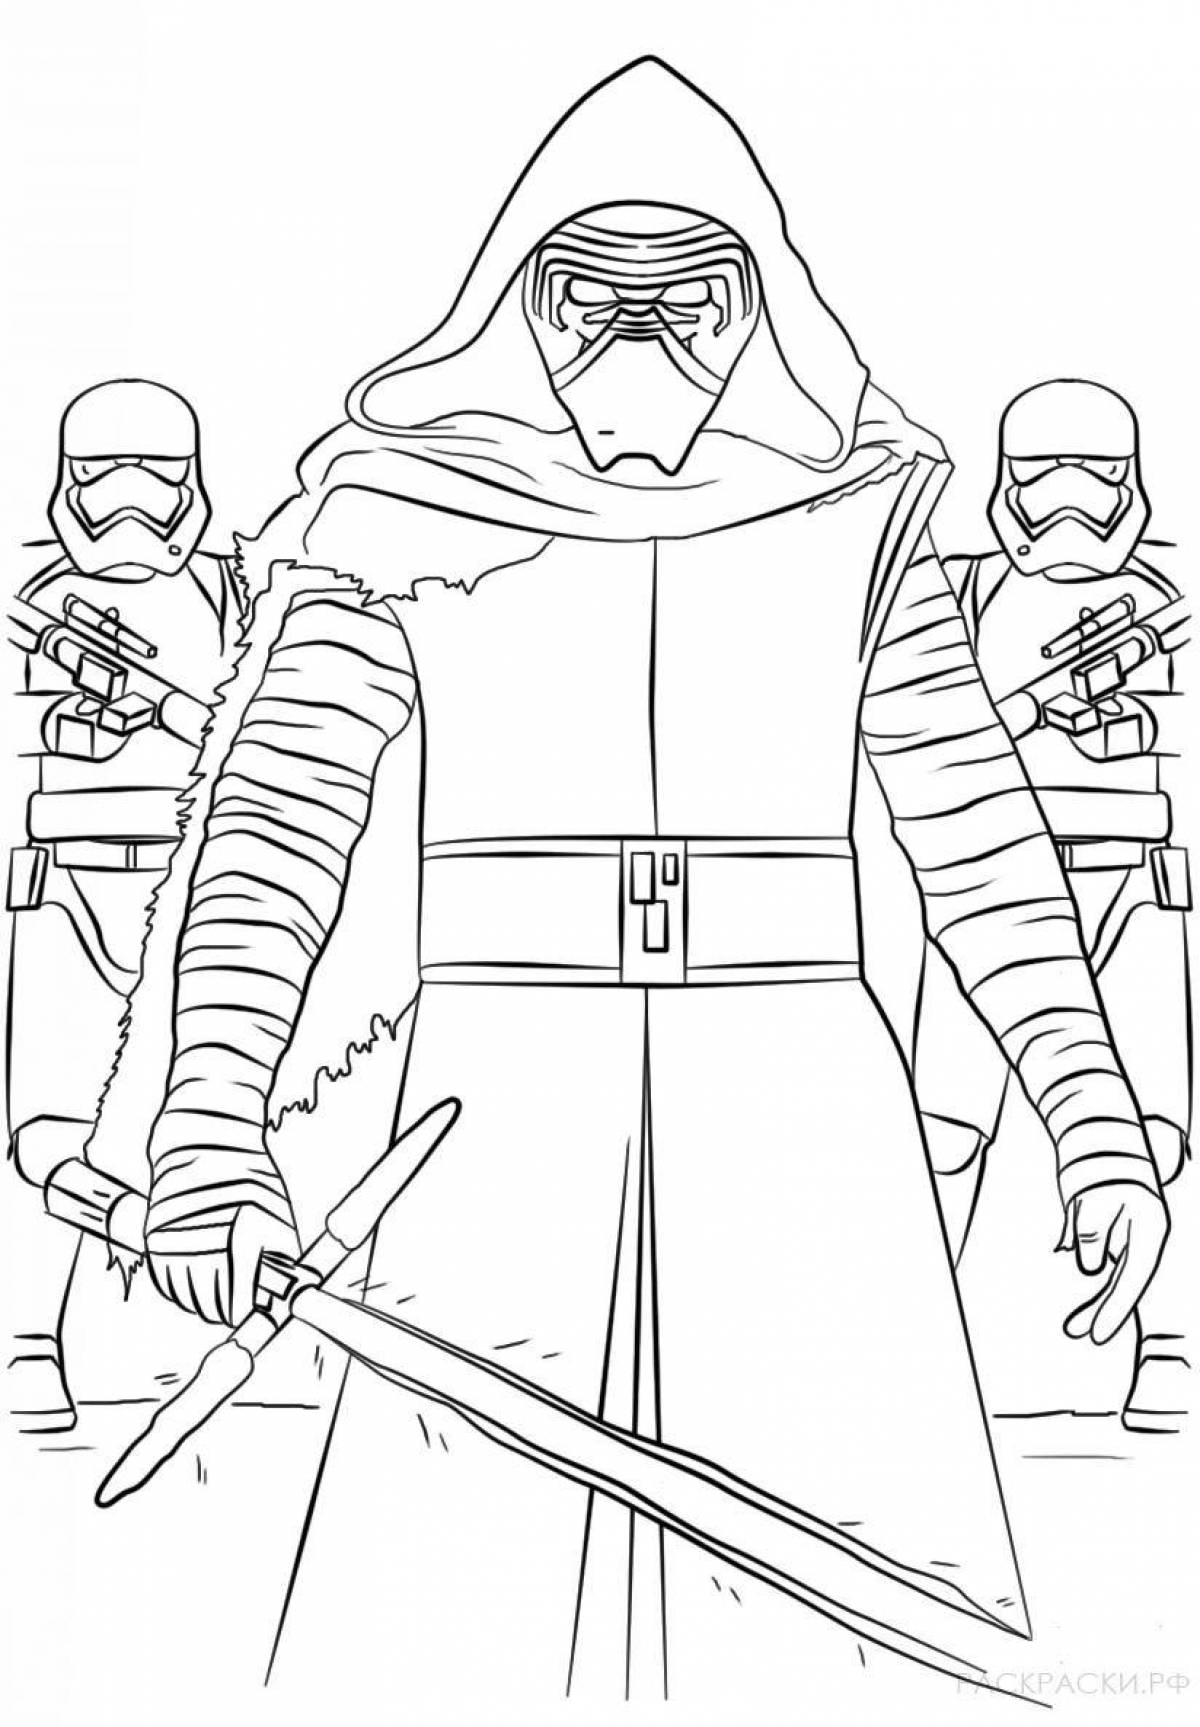 Sweet star wars coloring pages for kids